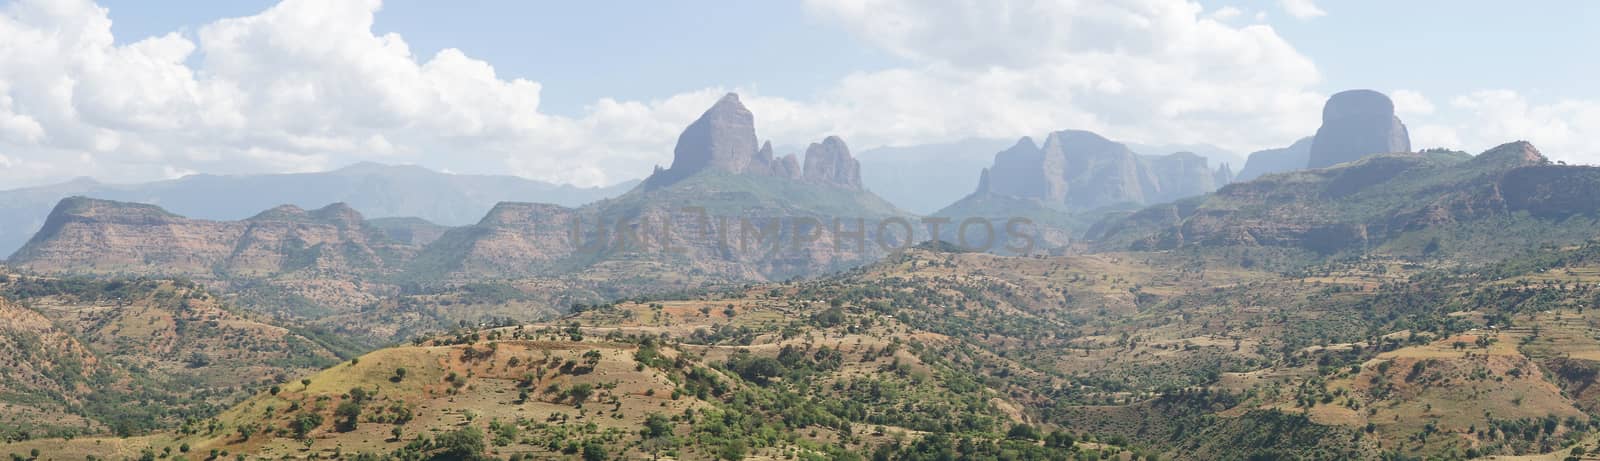 Chess pieces rocks, landscape in the north of Ethiopia, Africa